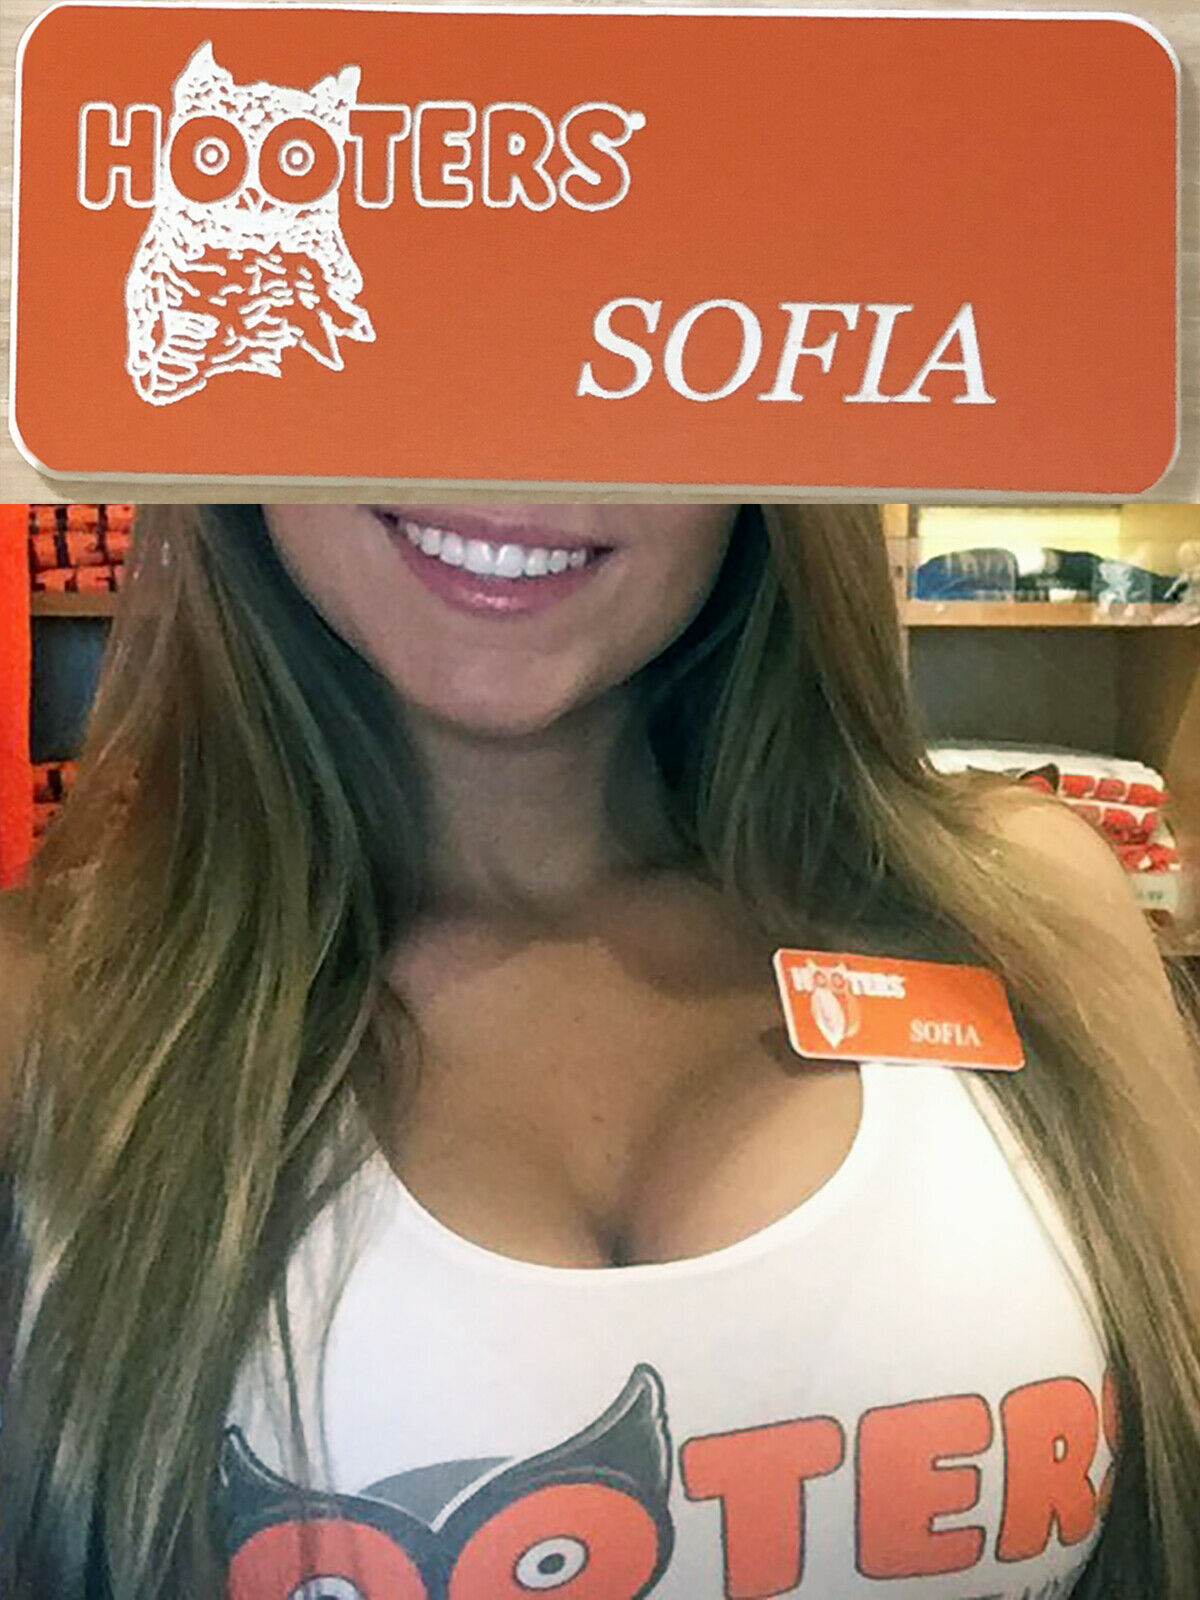 ~new~ Sofia Name Tag Hooters Uniform Halloween Costume Collectible Pin Badge